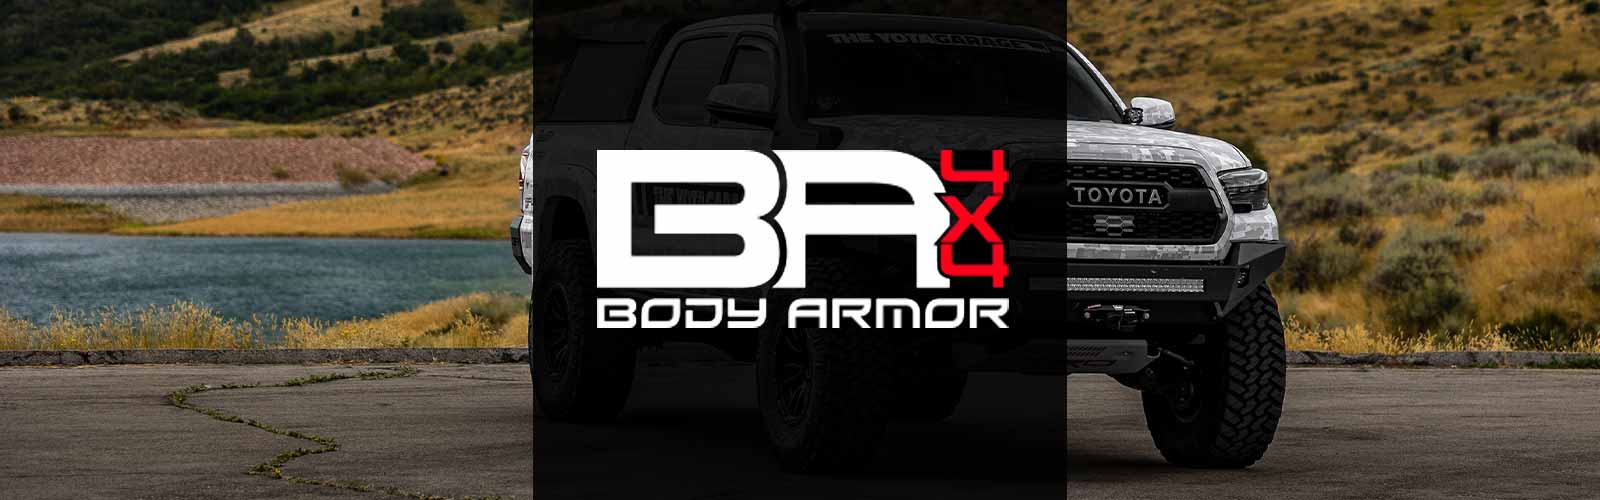 Bodyarmor 4x4 Toyota Bumpers and Armor at TheYotaGarage.com